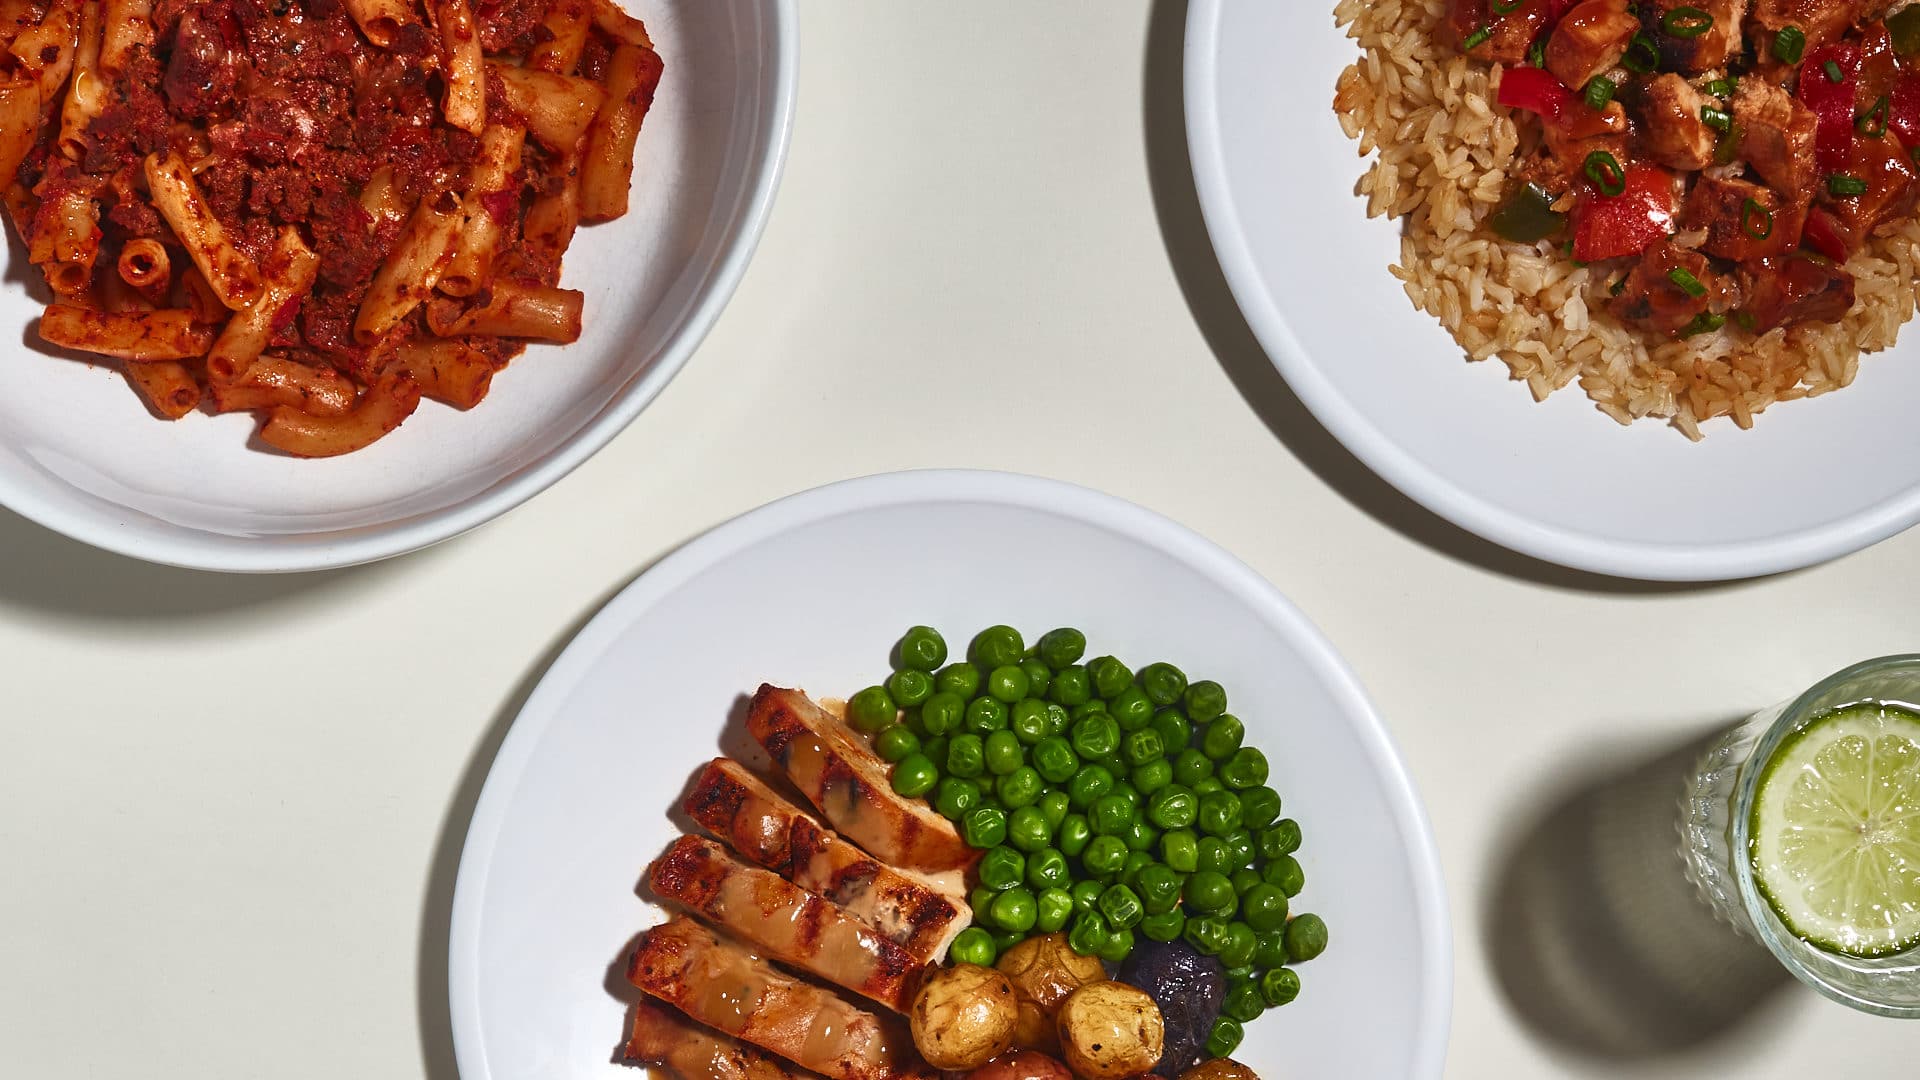 Three plates of food on a white background, one with pasta, one with chicken, potatoes and peas, and the third with rice, chicken and tomatoes.